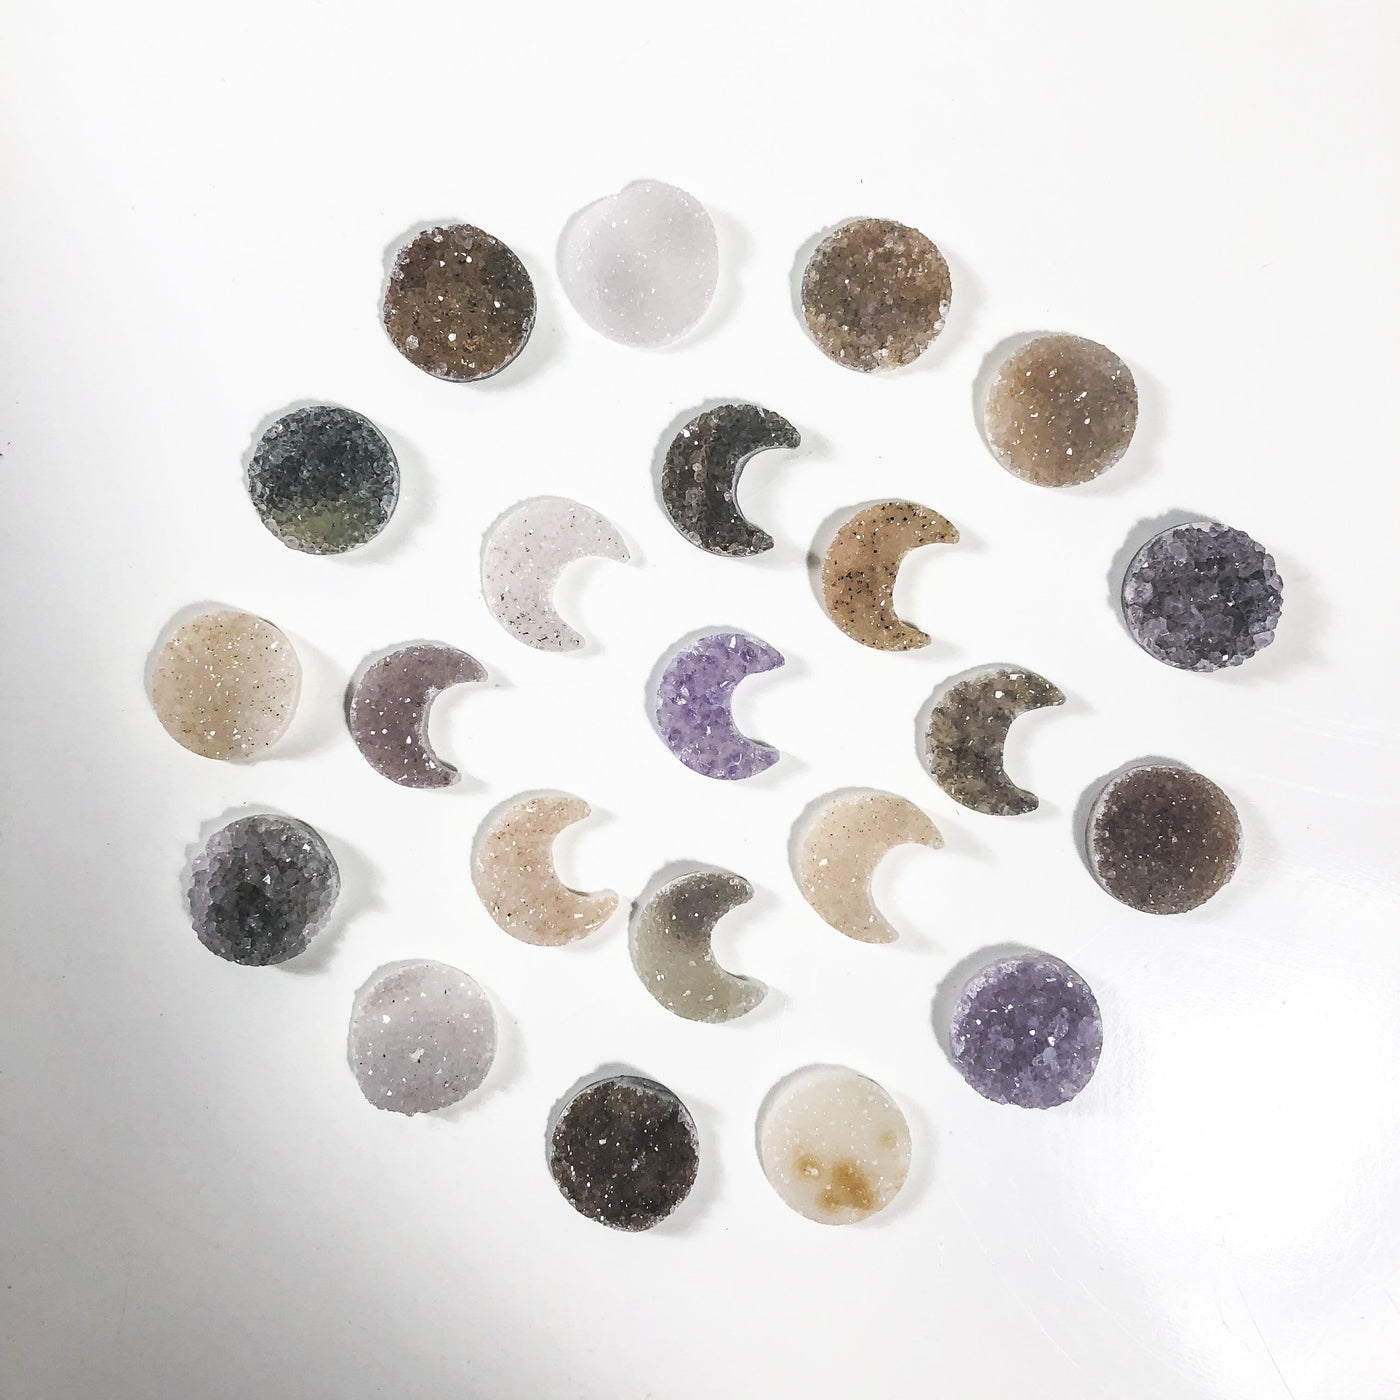 multiple Druzy Moon Crescent and Circle Cabochons displayed to show various colors and characteristics